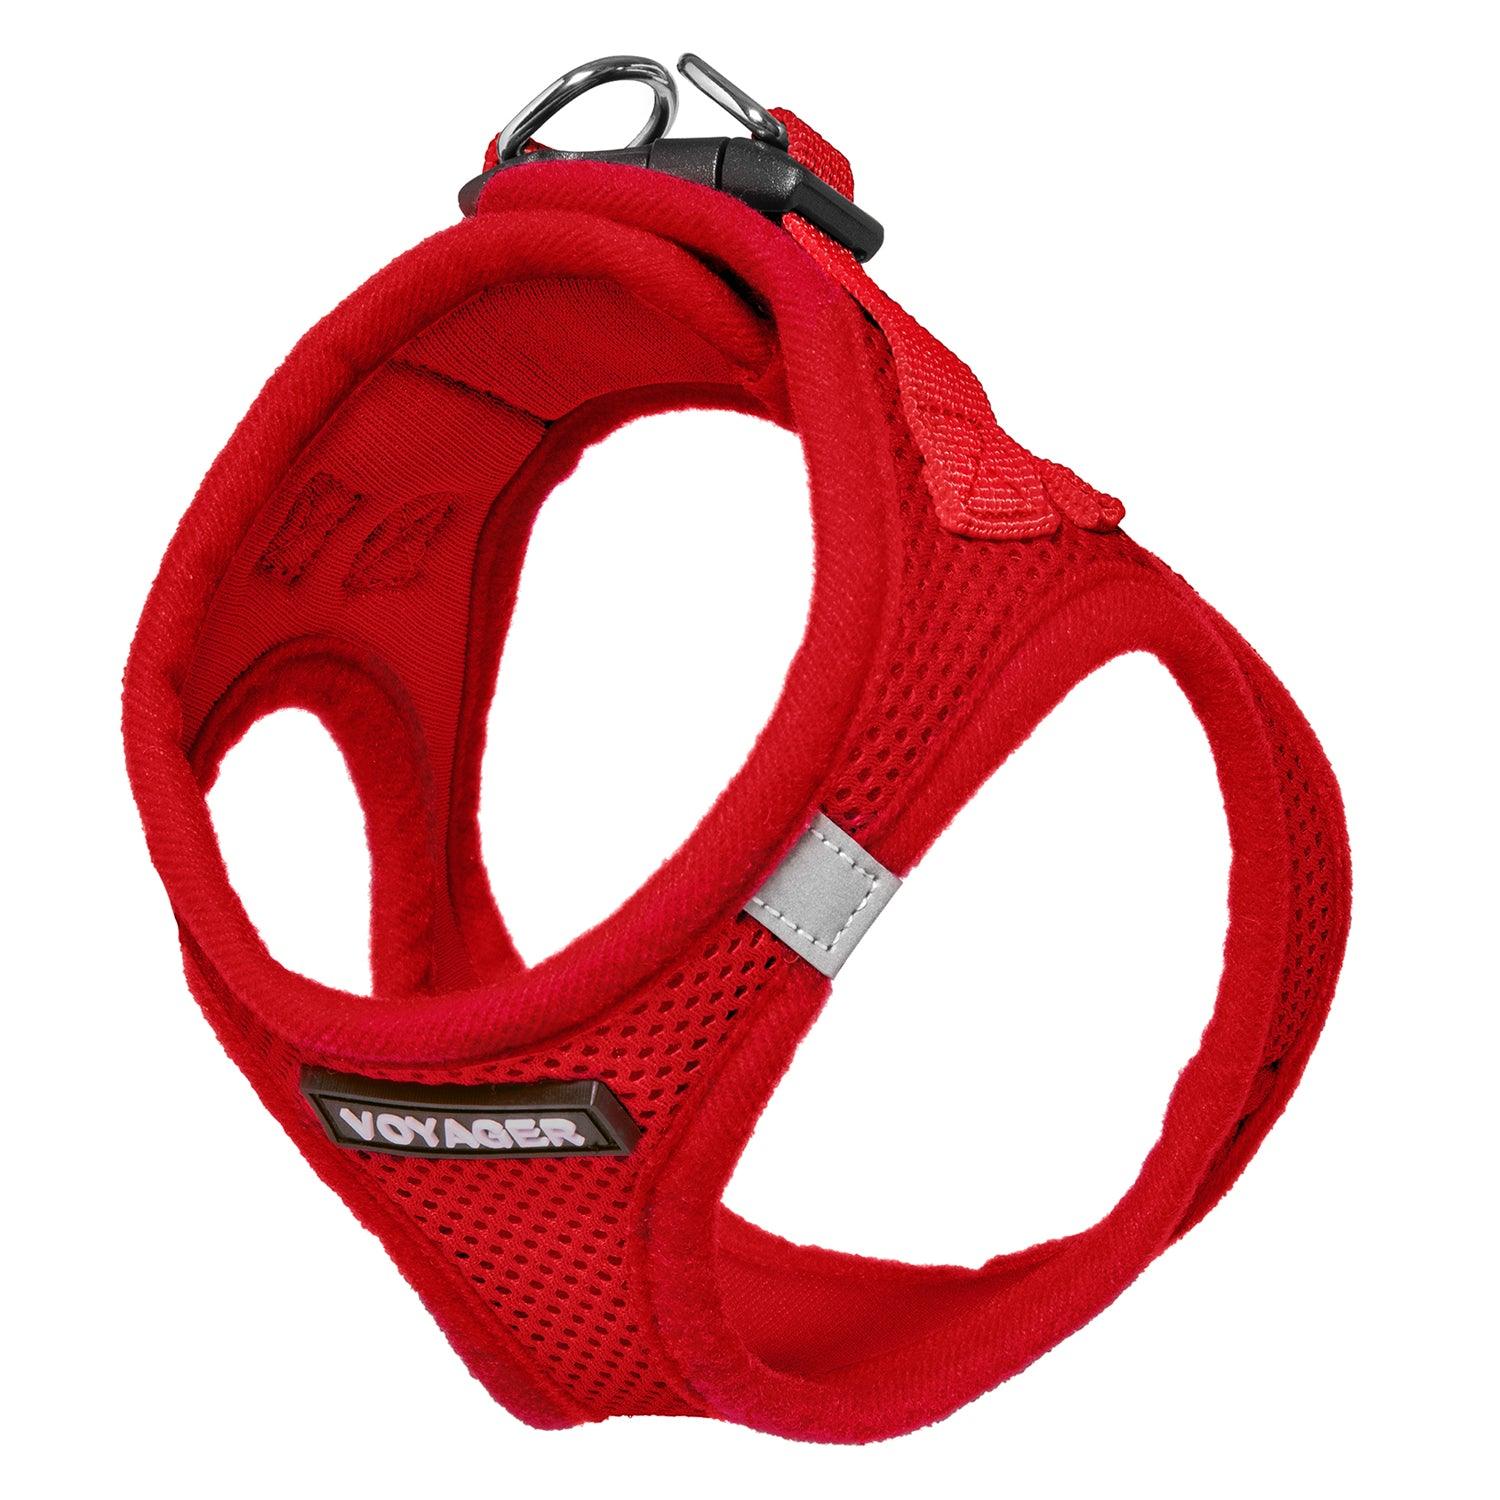 Step-In Air Harness For Cats - VOYAGER Dog Harnesses